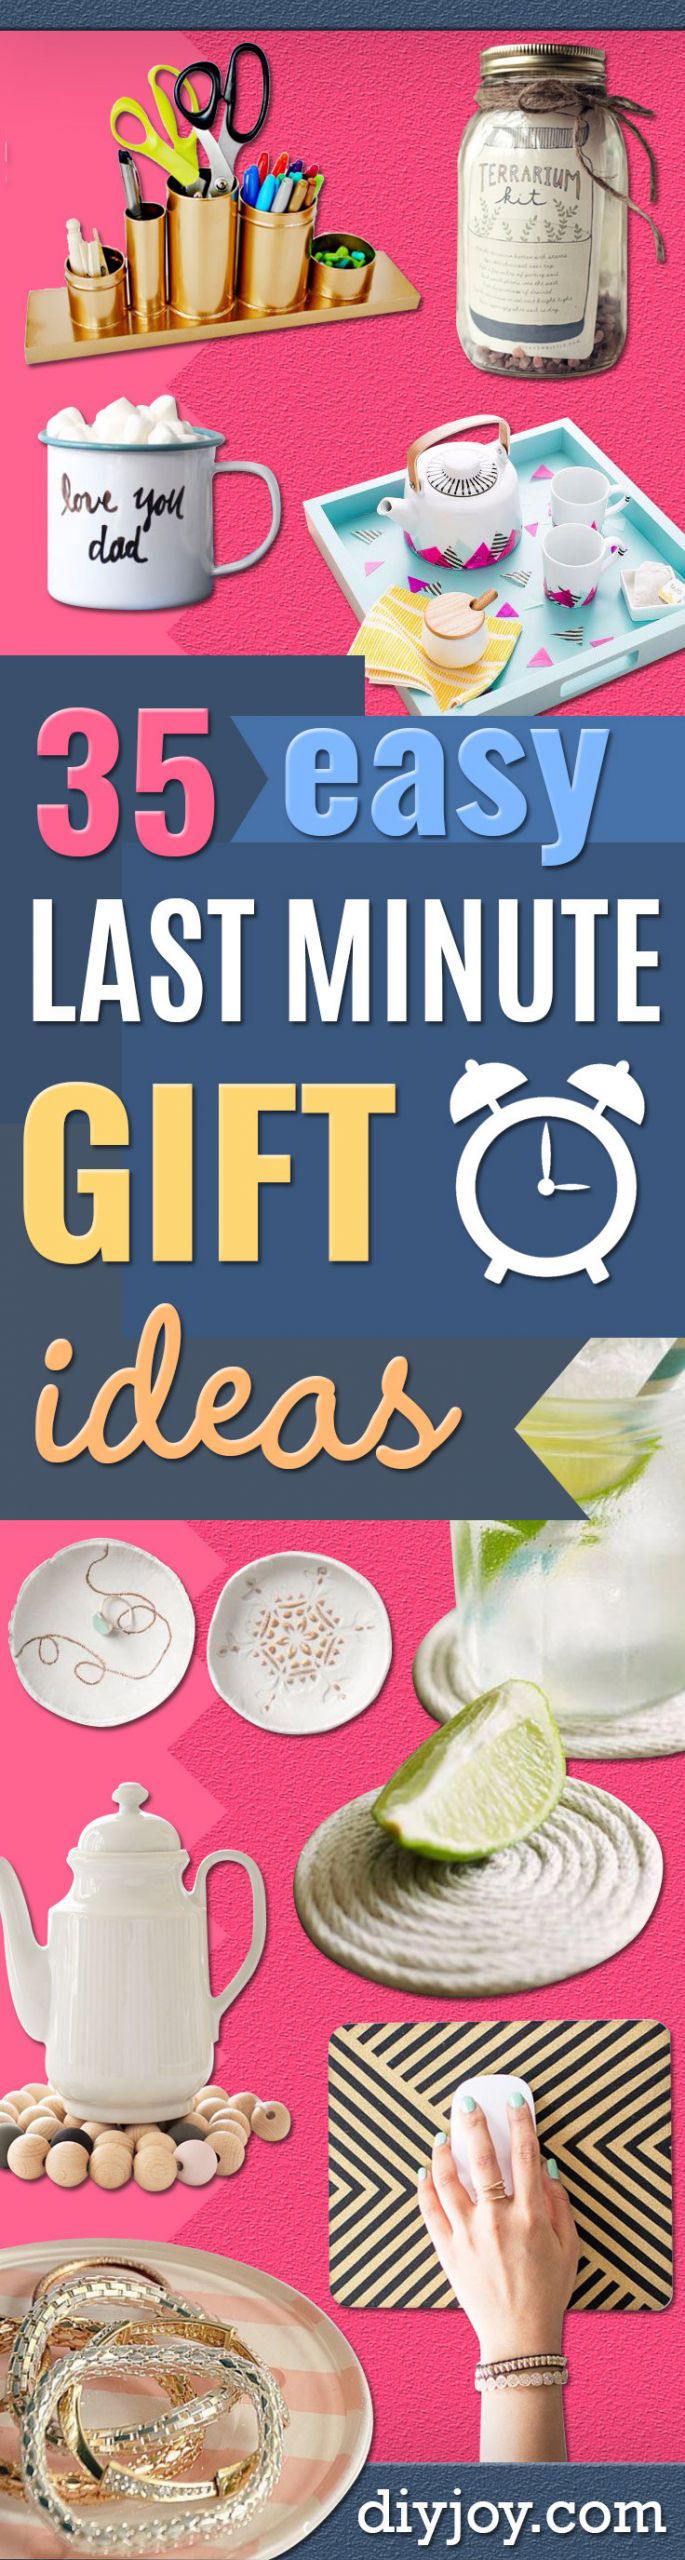 Last Minute Gift Ideas For Girlfriend
 Last Minute Homemade Christmas Gift Ideas For Dad Home